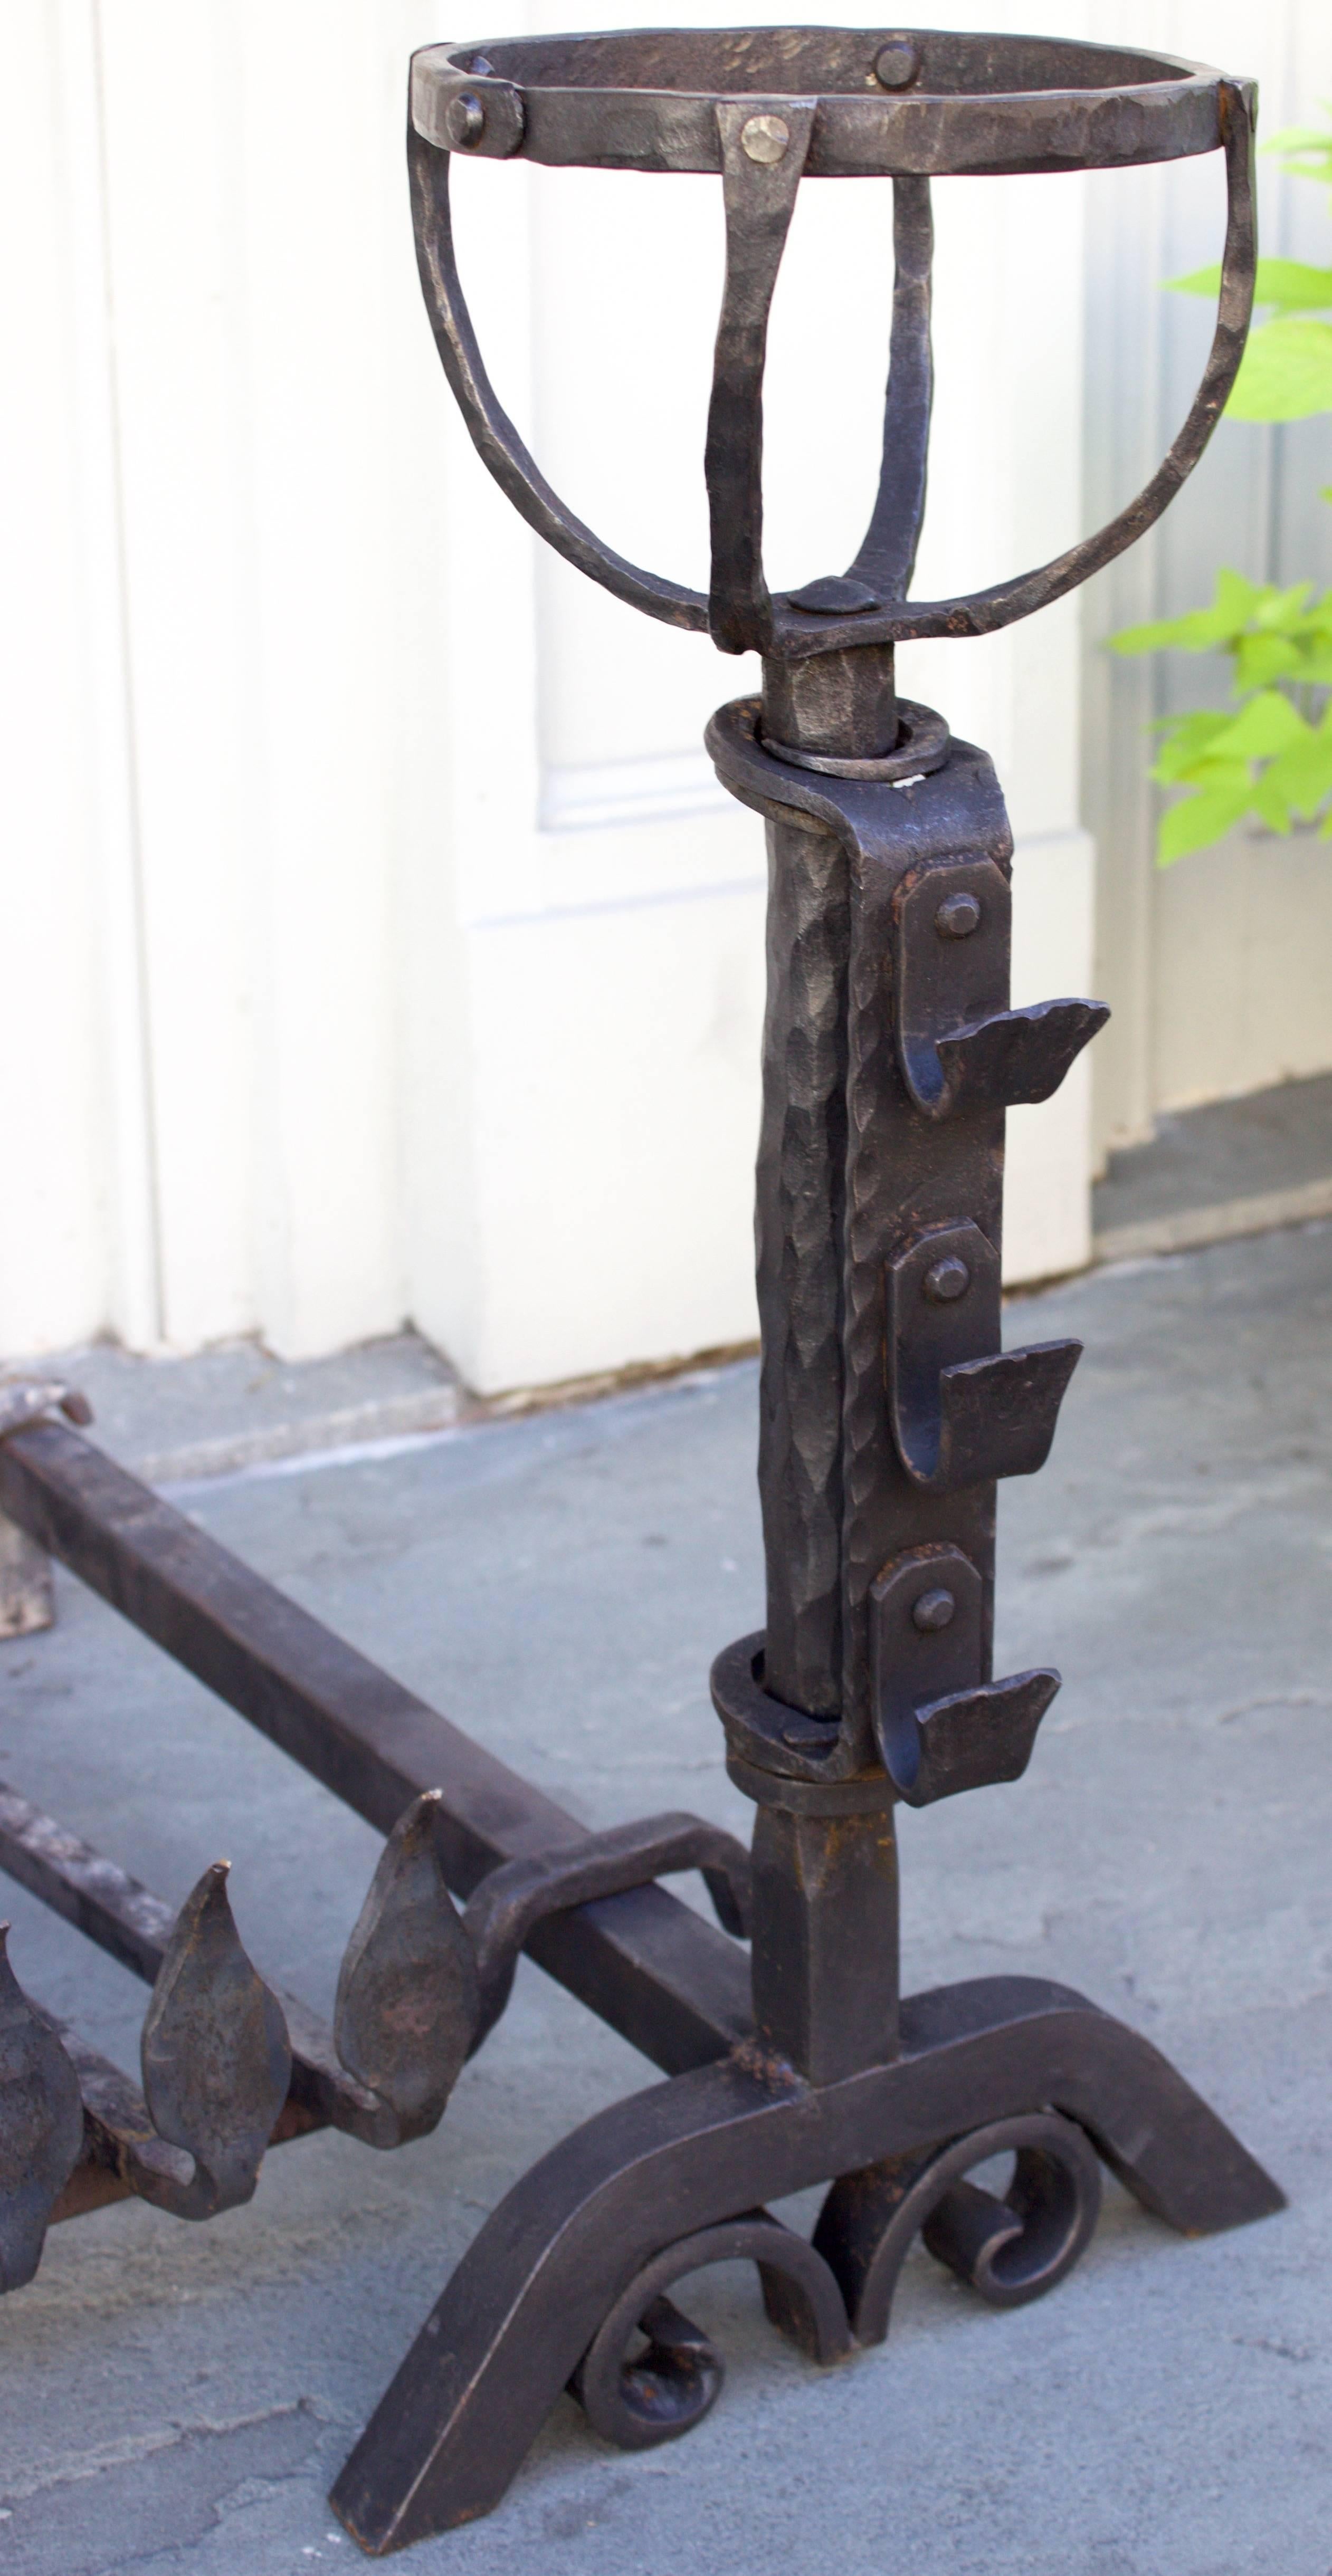 Landier is the French name for this kind of andirons. They are high hand-forged iron posts with spit hooks for rotisserie and at top a skeleton receptacle to support soup or other pots to be warmed. It comes with its original grate, which is rare.